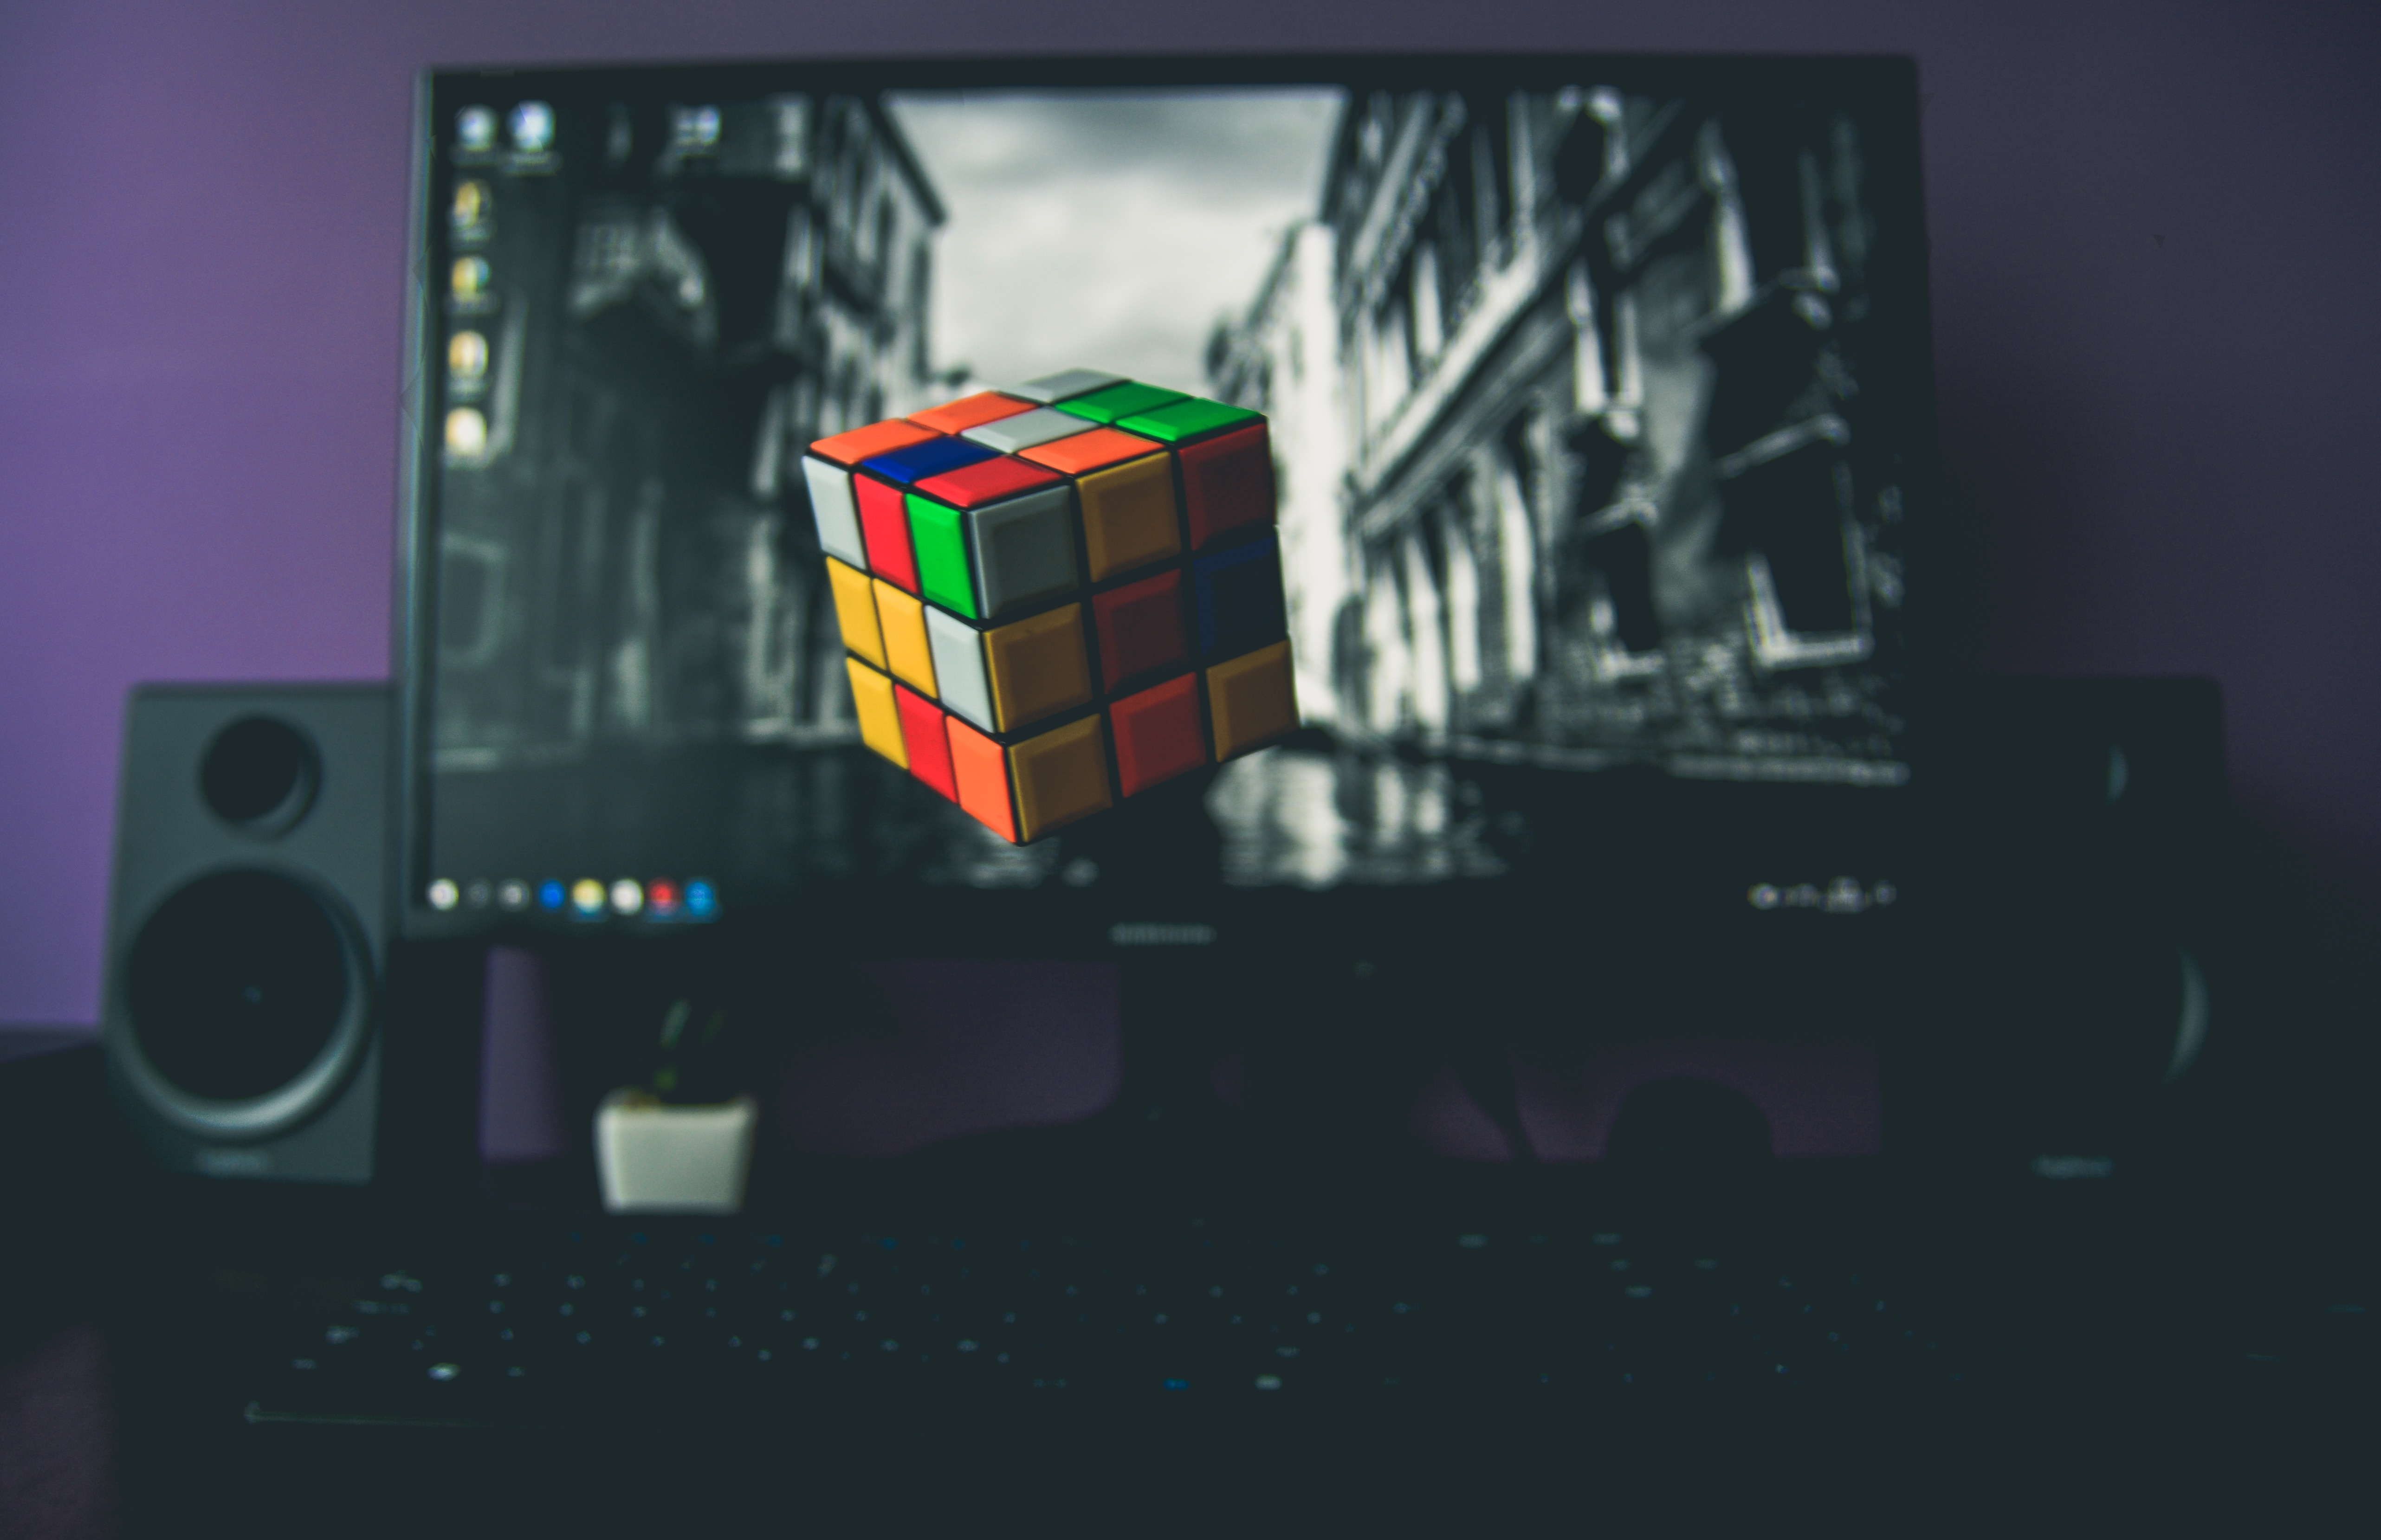 flat screen monitor turned on with 3x3 rubik's cube wallpaper